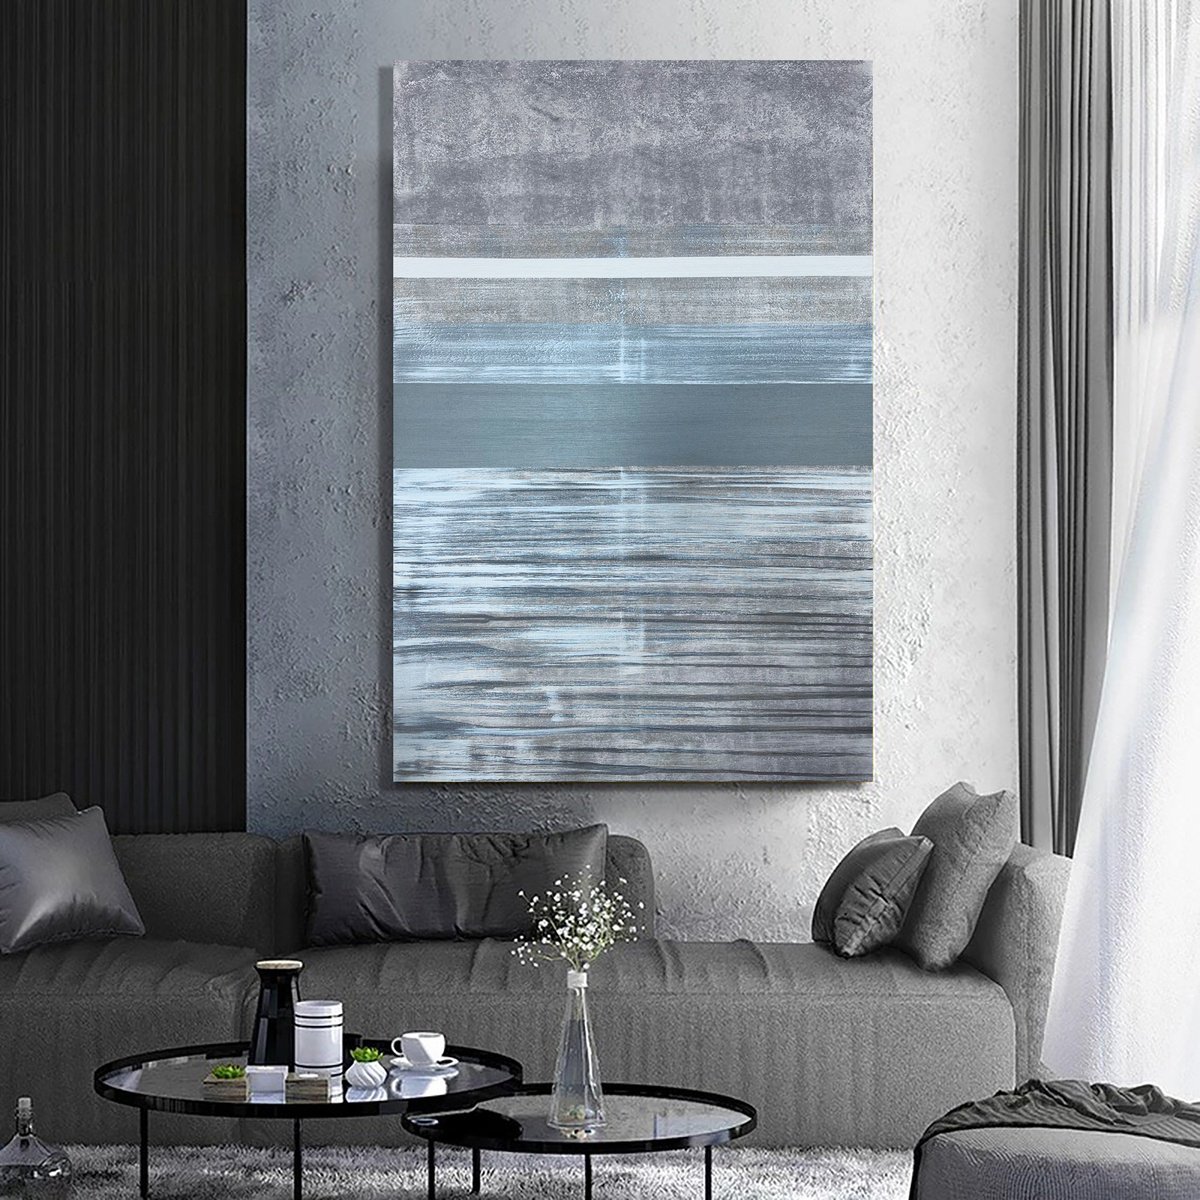 120x80cm Large Gray Abstract. Silver luxury. by Marina Skromova